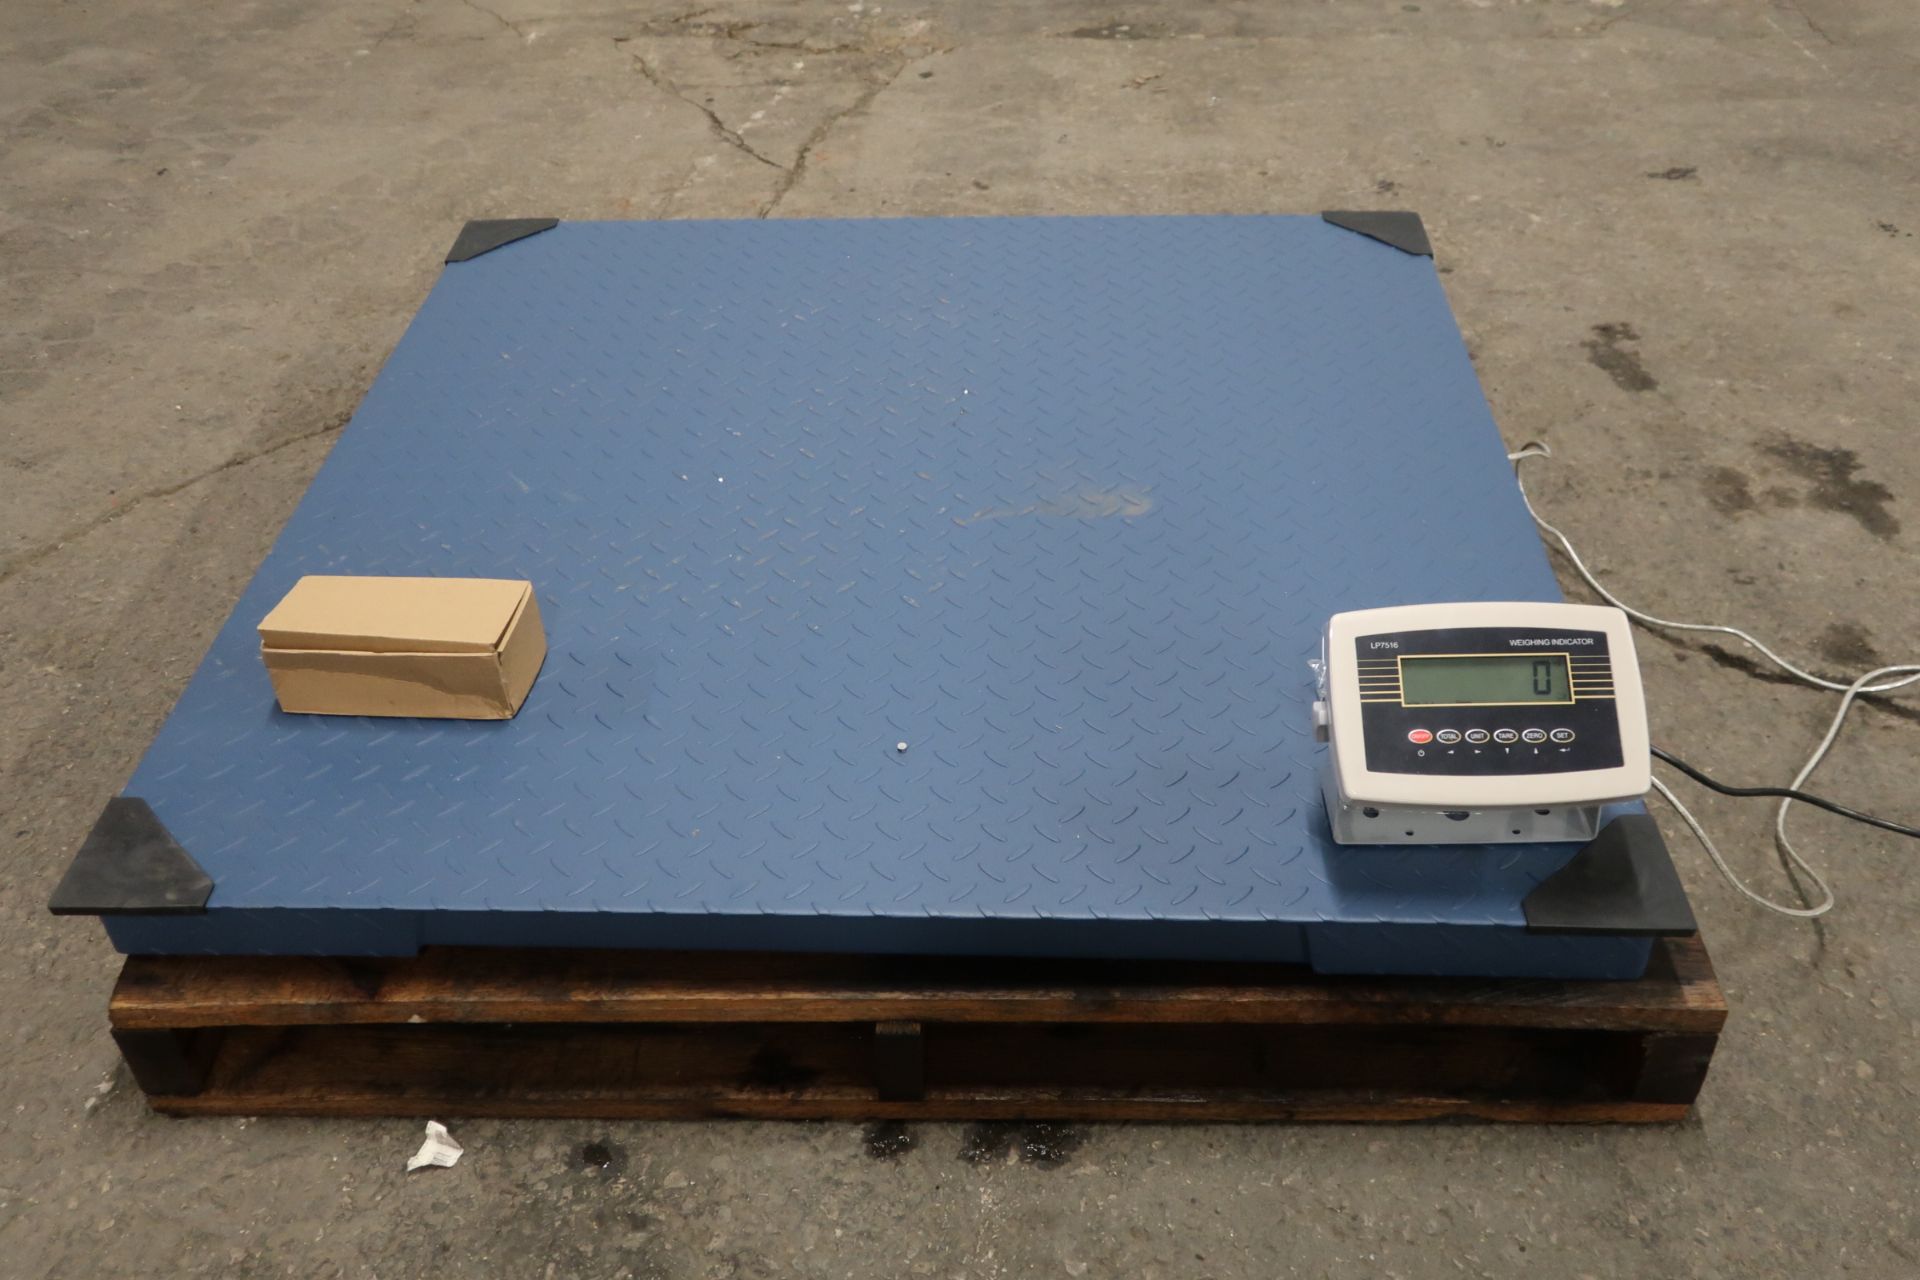 MINT 10000lb digital floor scale - 48" x 48" - Great DRO (digital readout) with 1lb accuracy